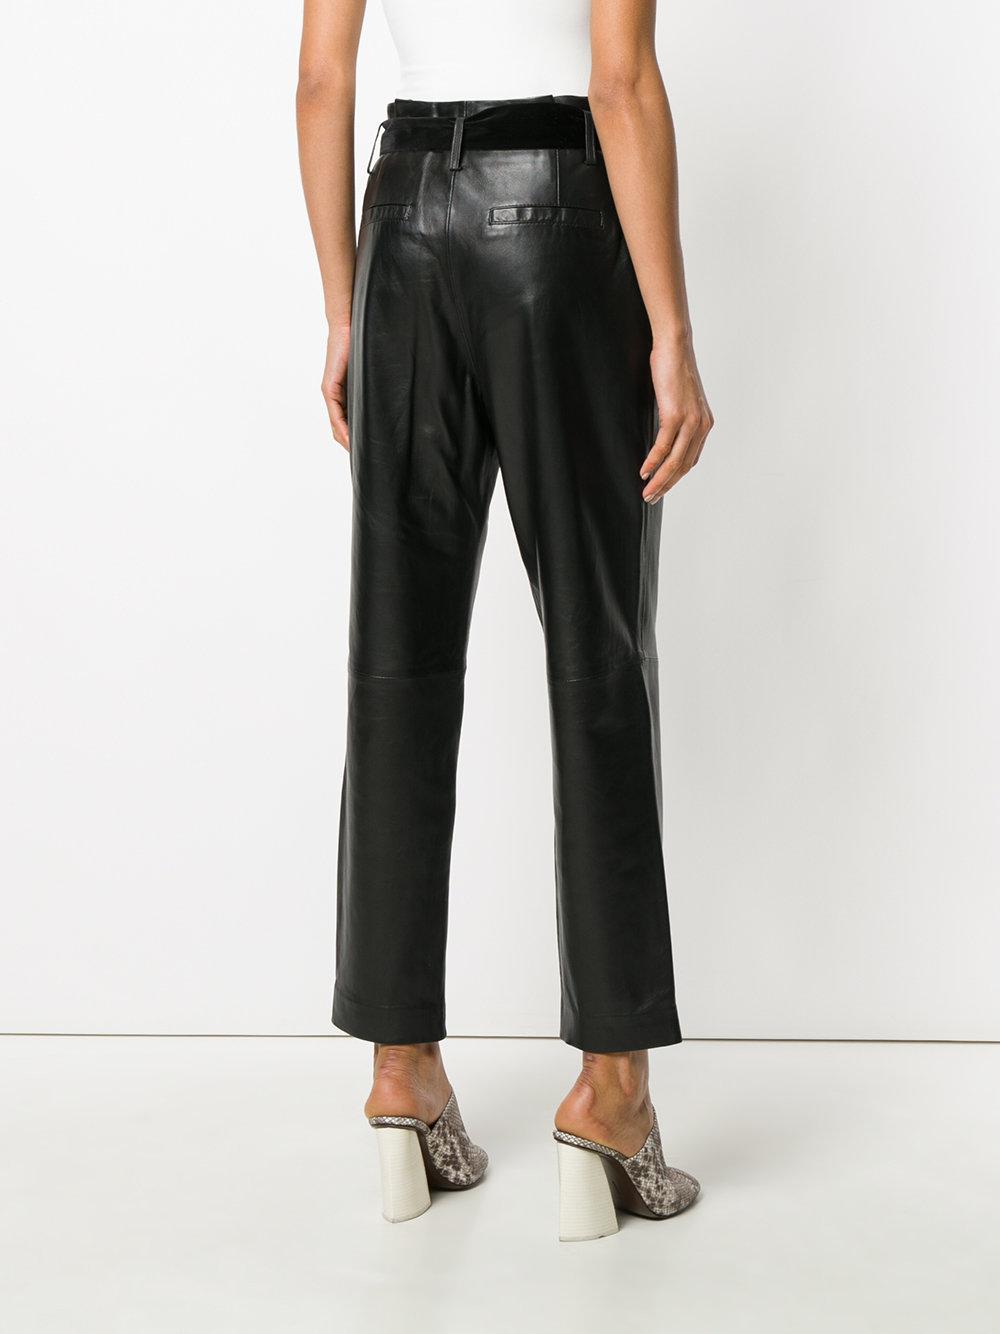 MICHAEL Michael Kors High-waisted Pleated Leather Pants in Black - Lyst